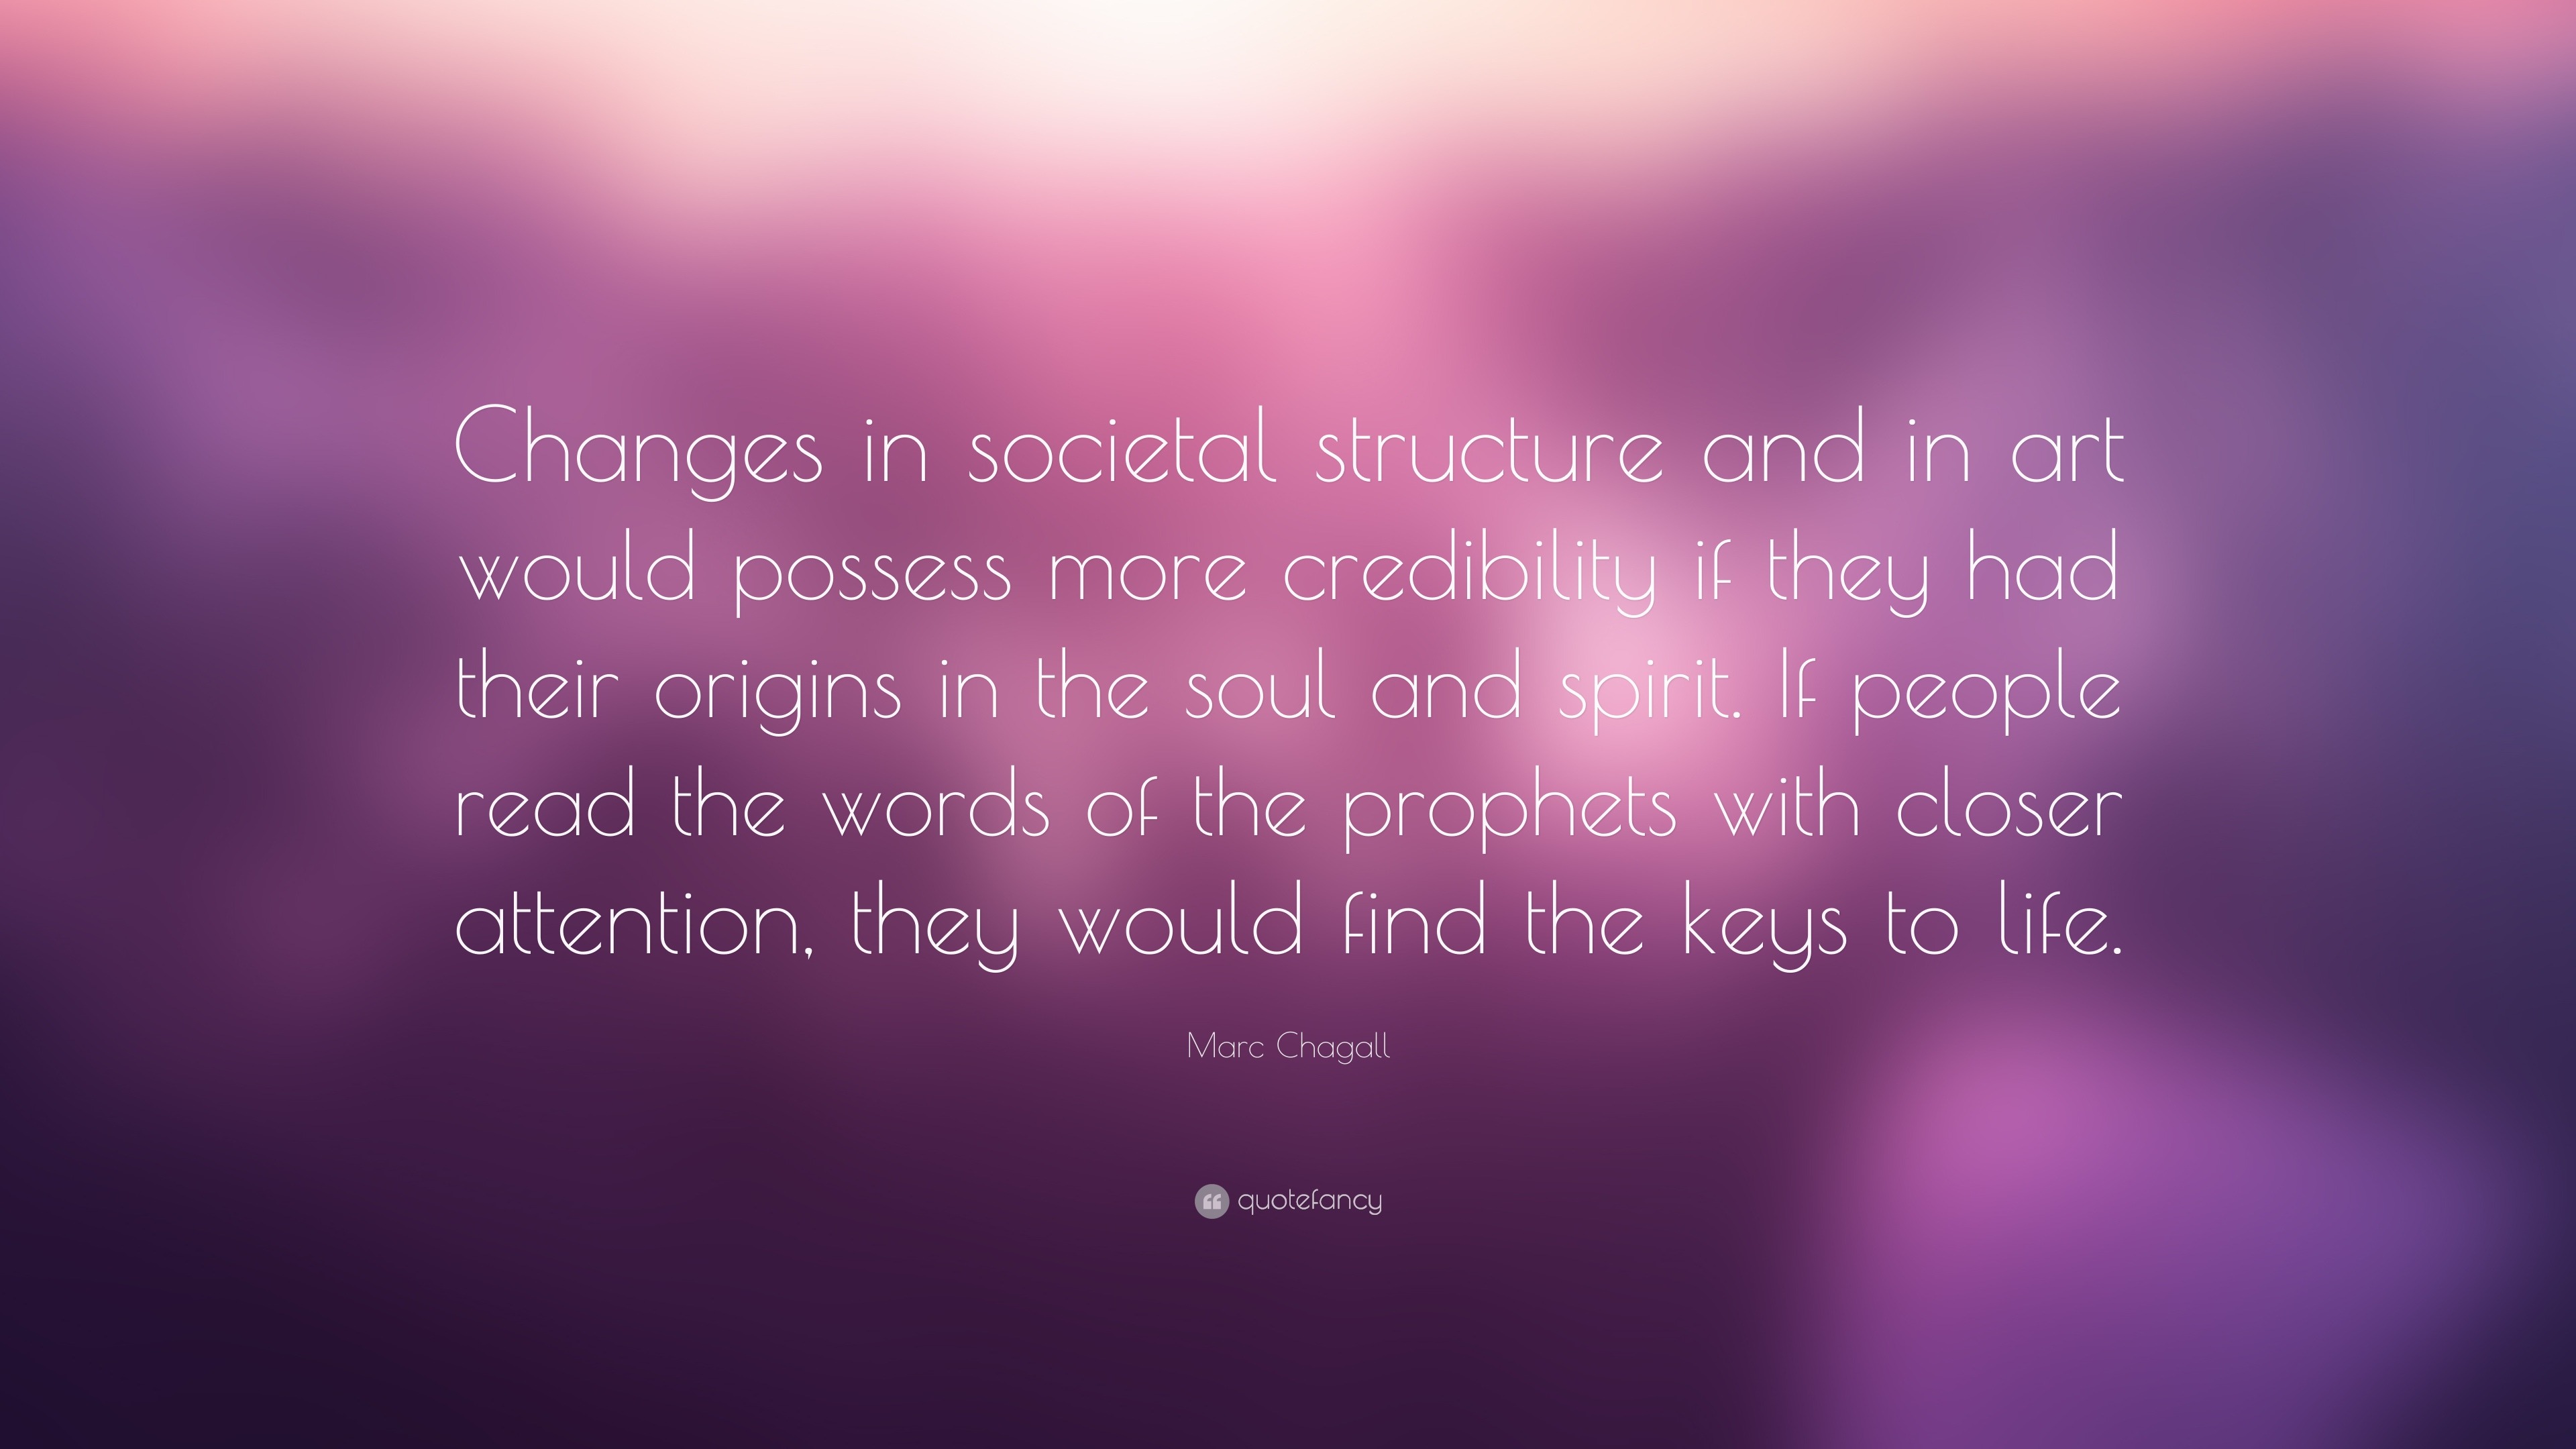 Marc Chagall Quote: “Changes in societal structure and in art would ...